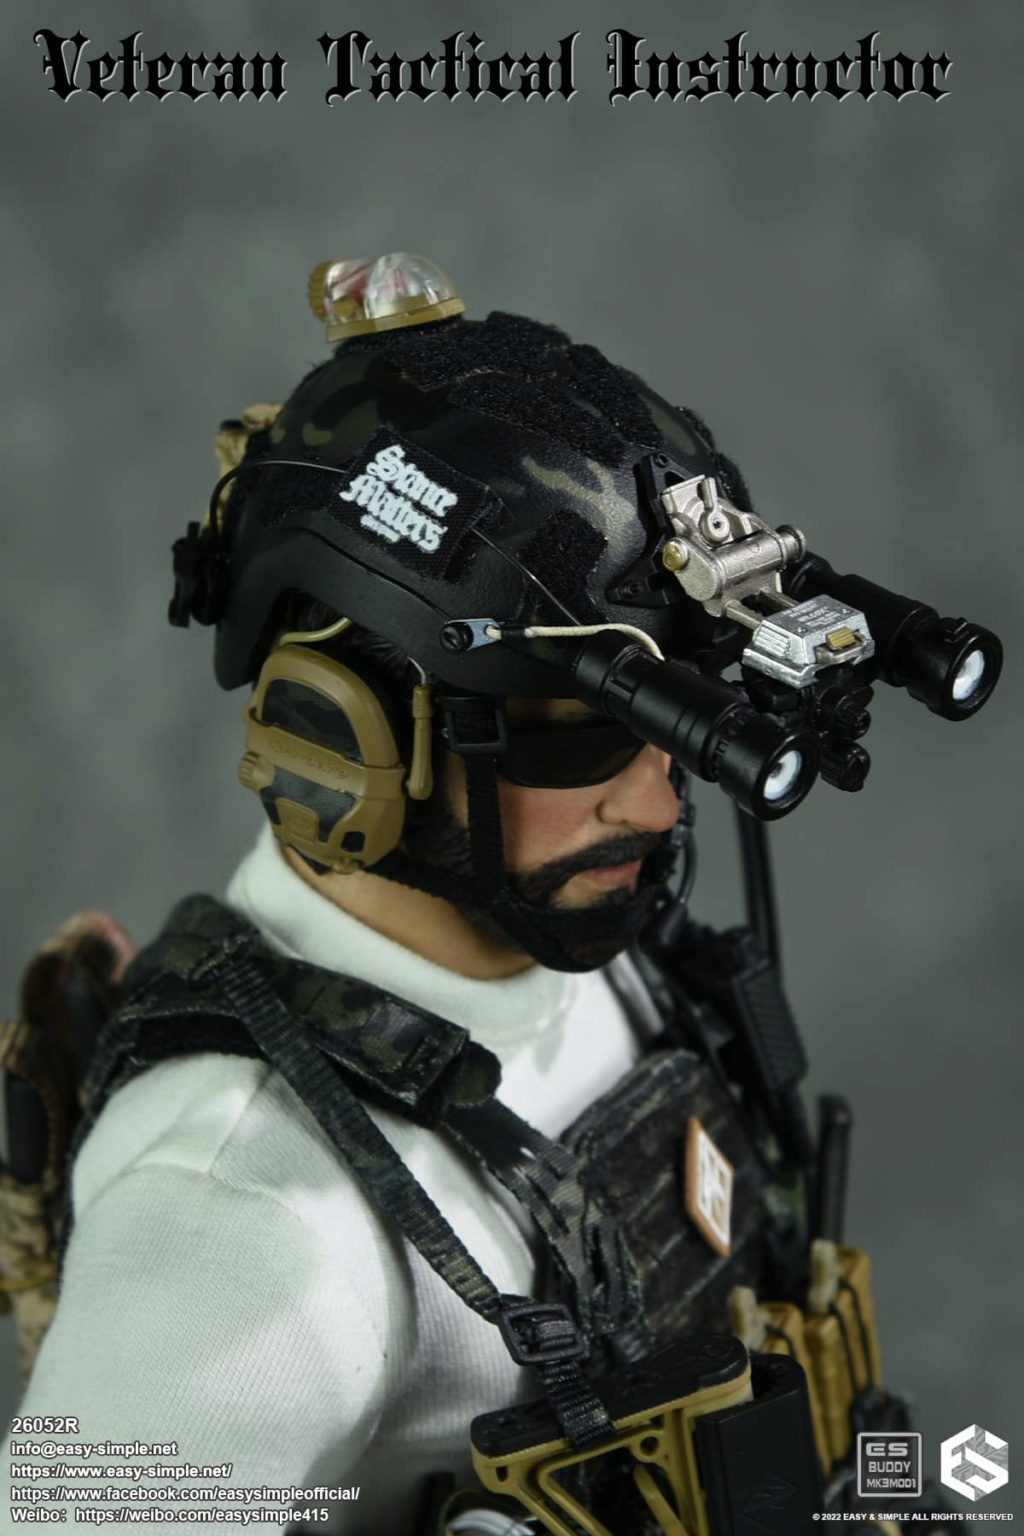 ModernMilitary - NEW PRODUCT: Easy&Simple: 26052R 1/6 Scale Veteran Tactical Instructor 31159510